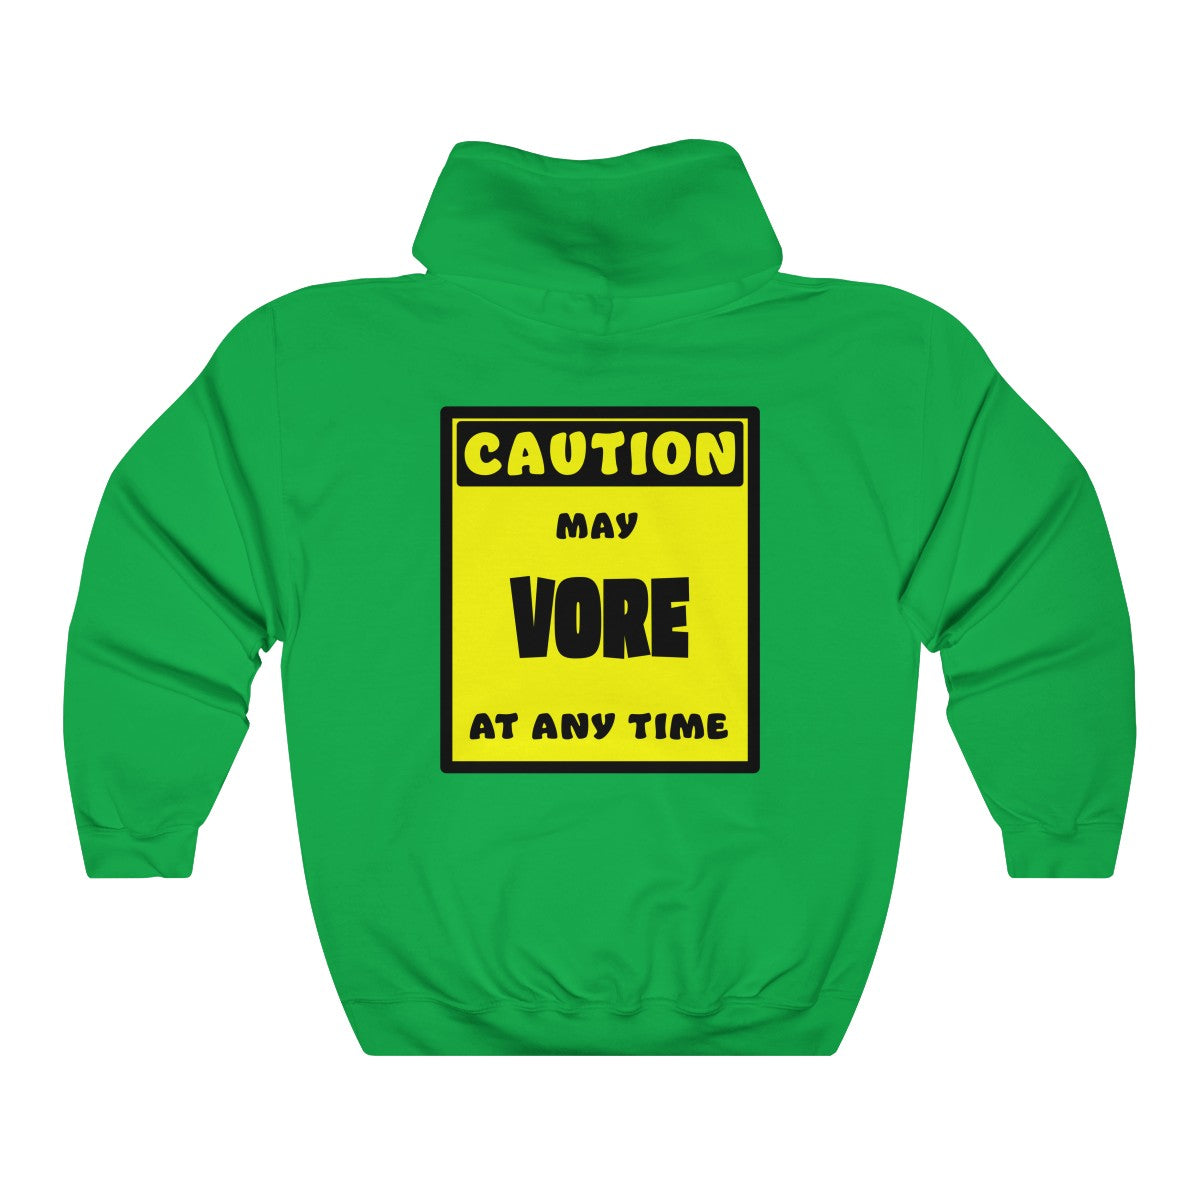 CAUTION! May VORE at any time! - Hoodie Hoodie AFLT-Whootorca Green S 